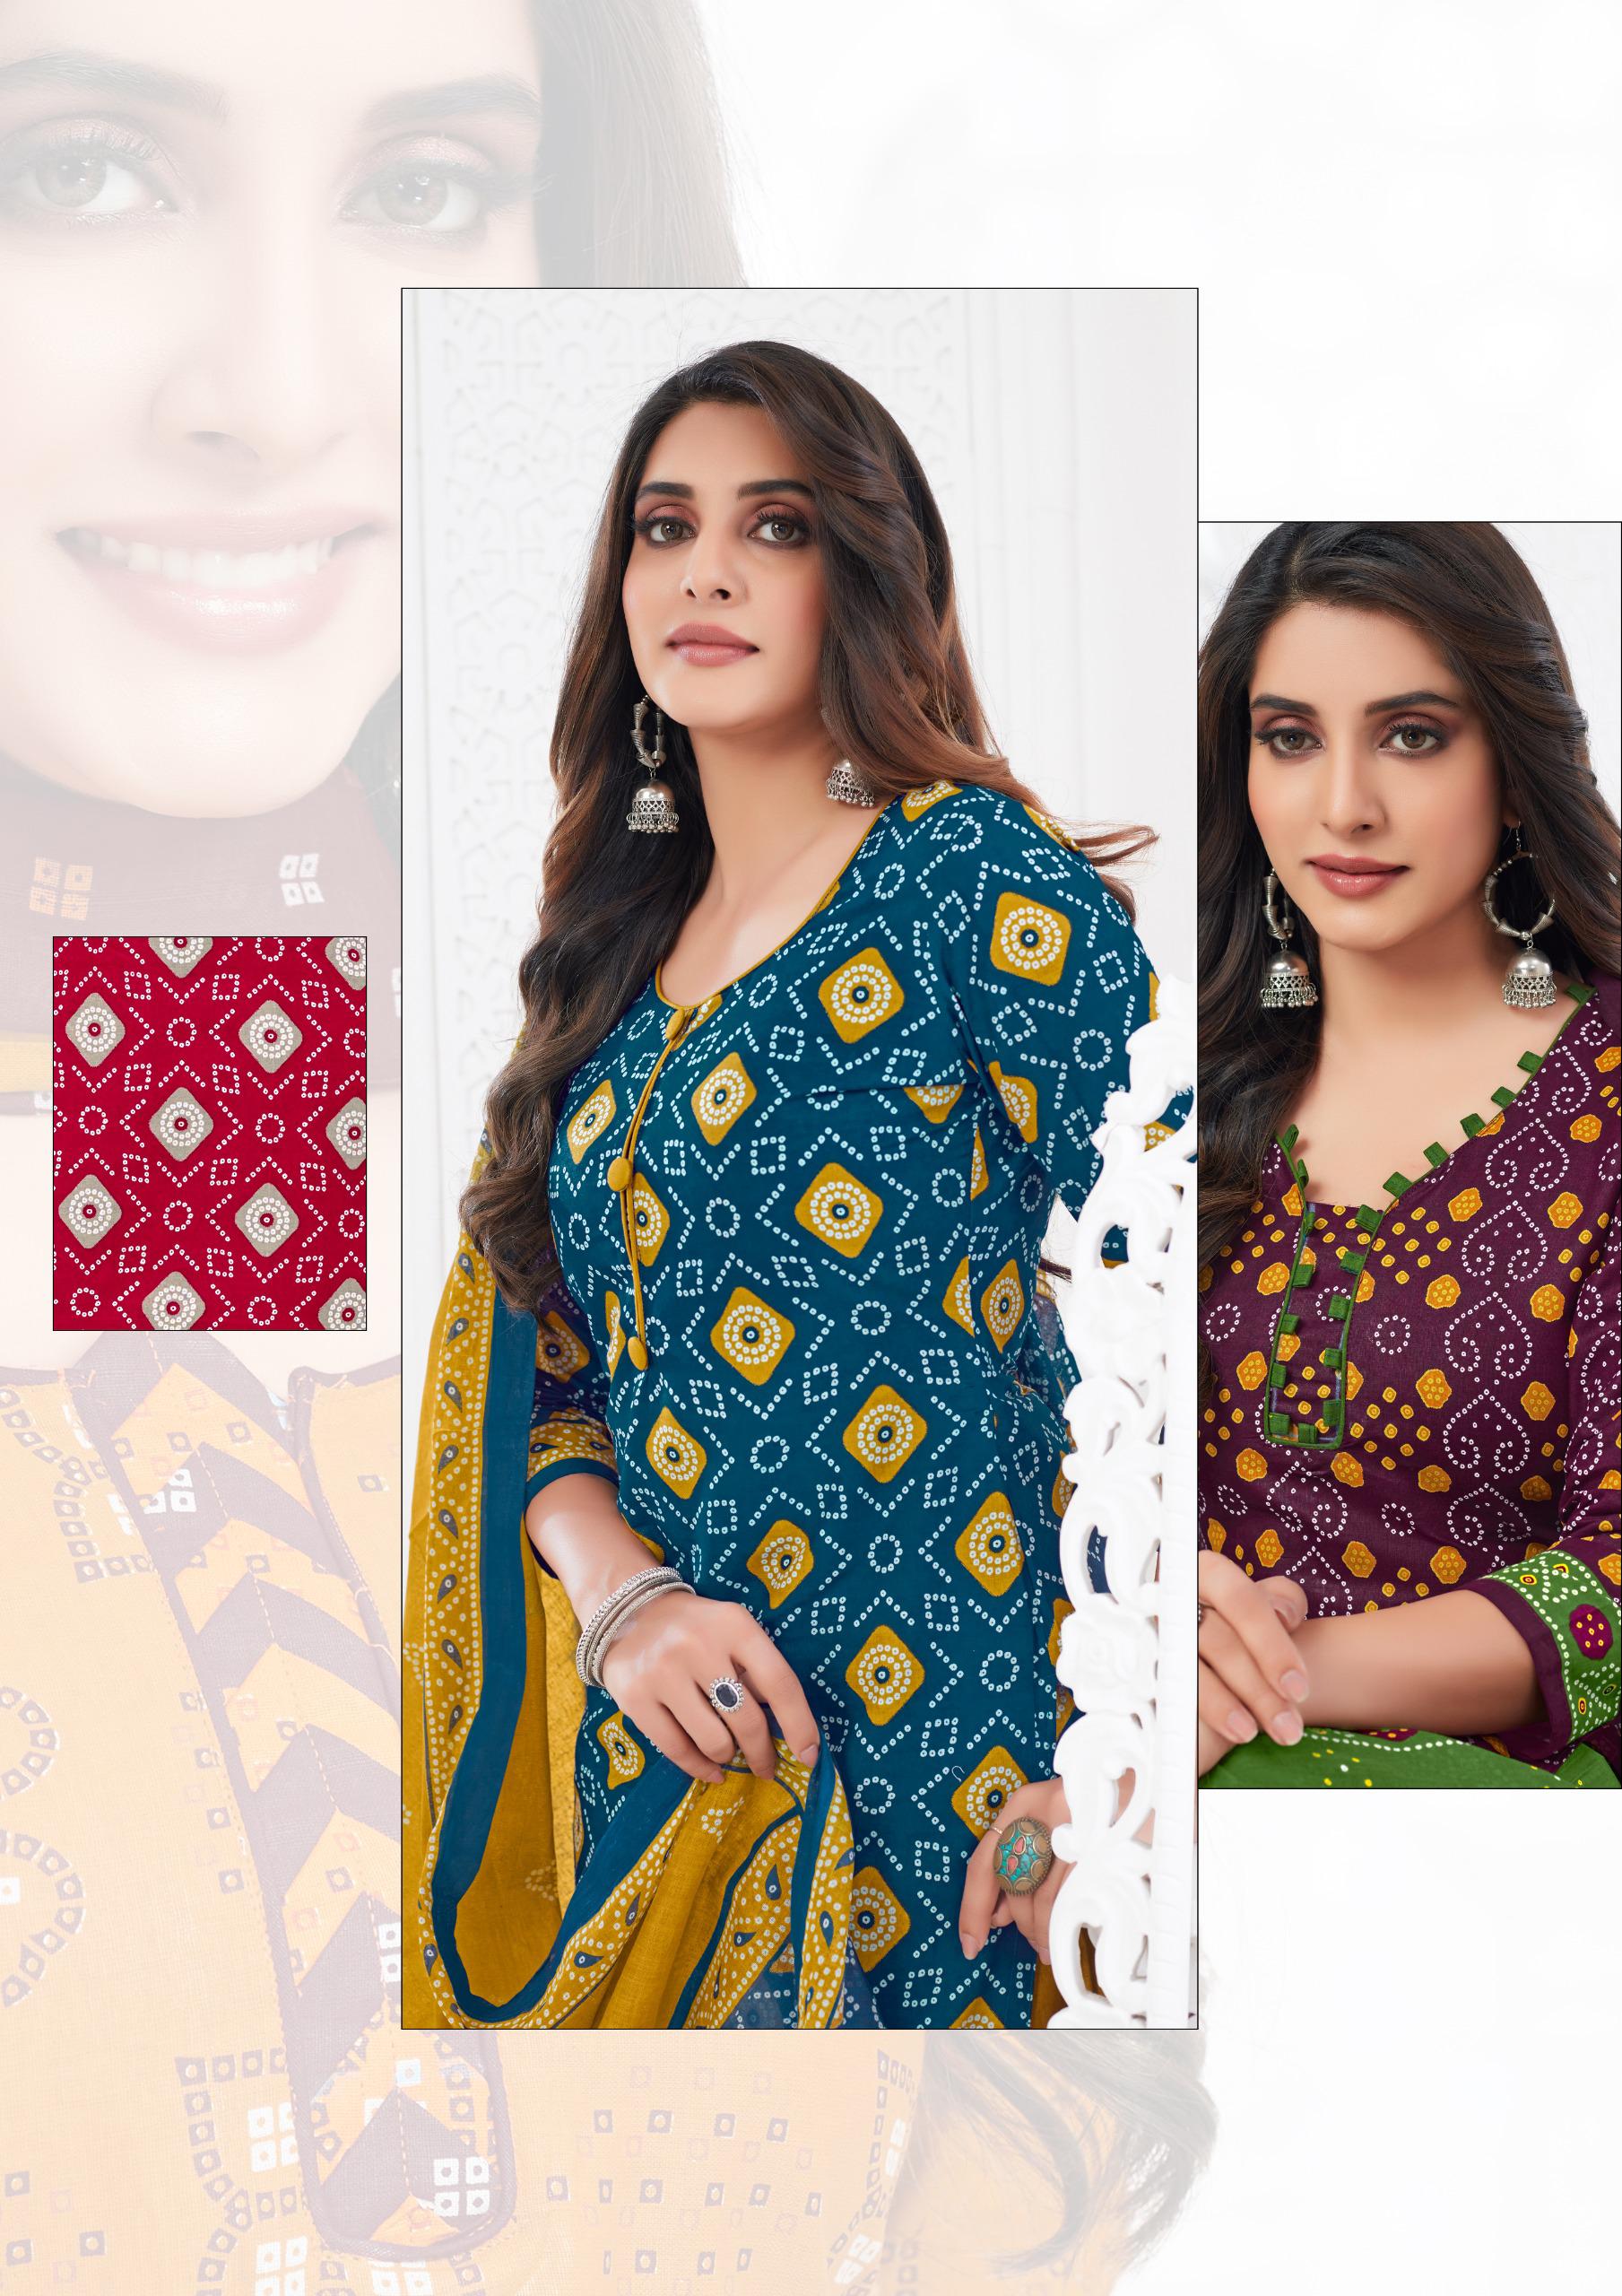 Madhav Fashion Bandhani Special Vol 2 Cotton Printed Dress Material Wholesale Supplier In Jetpur